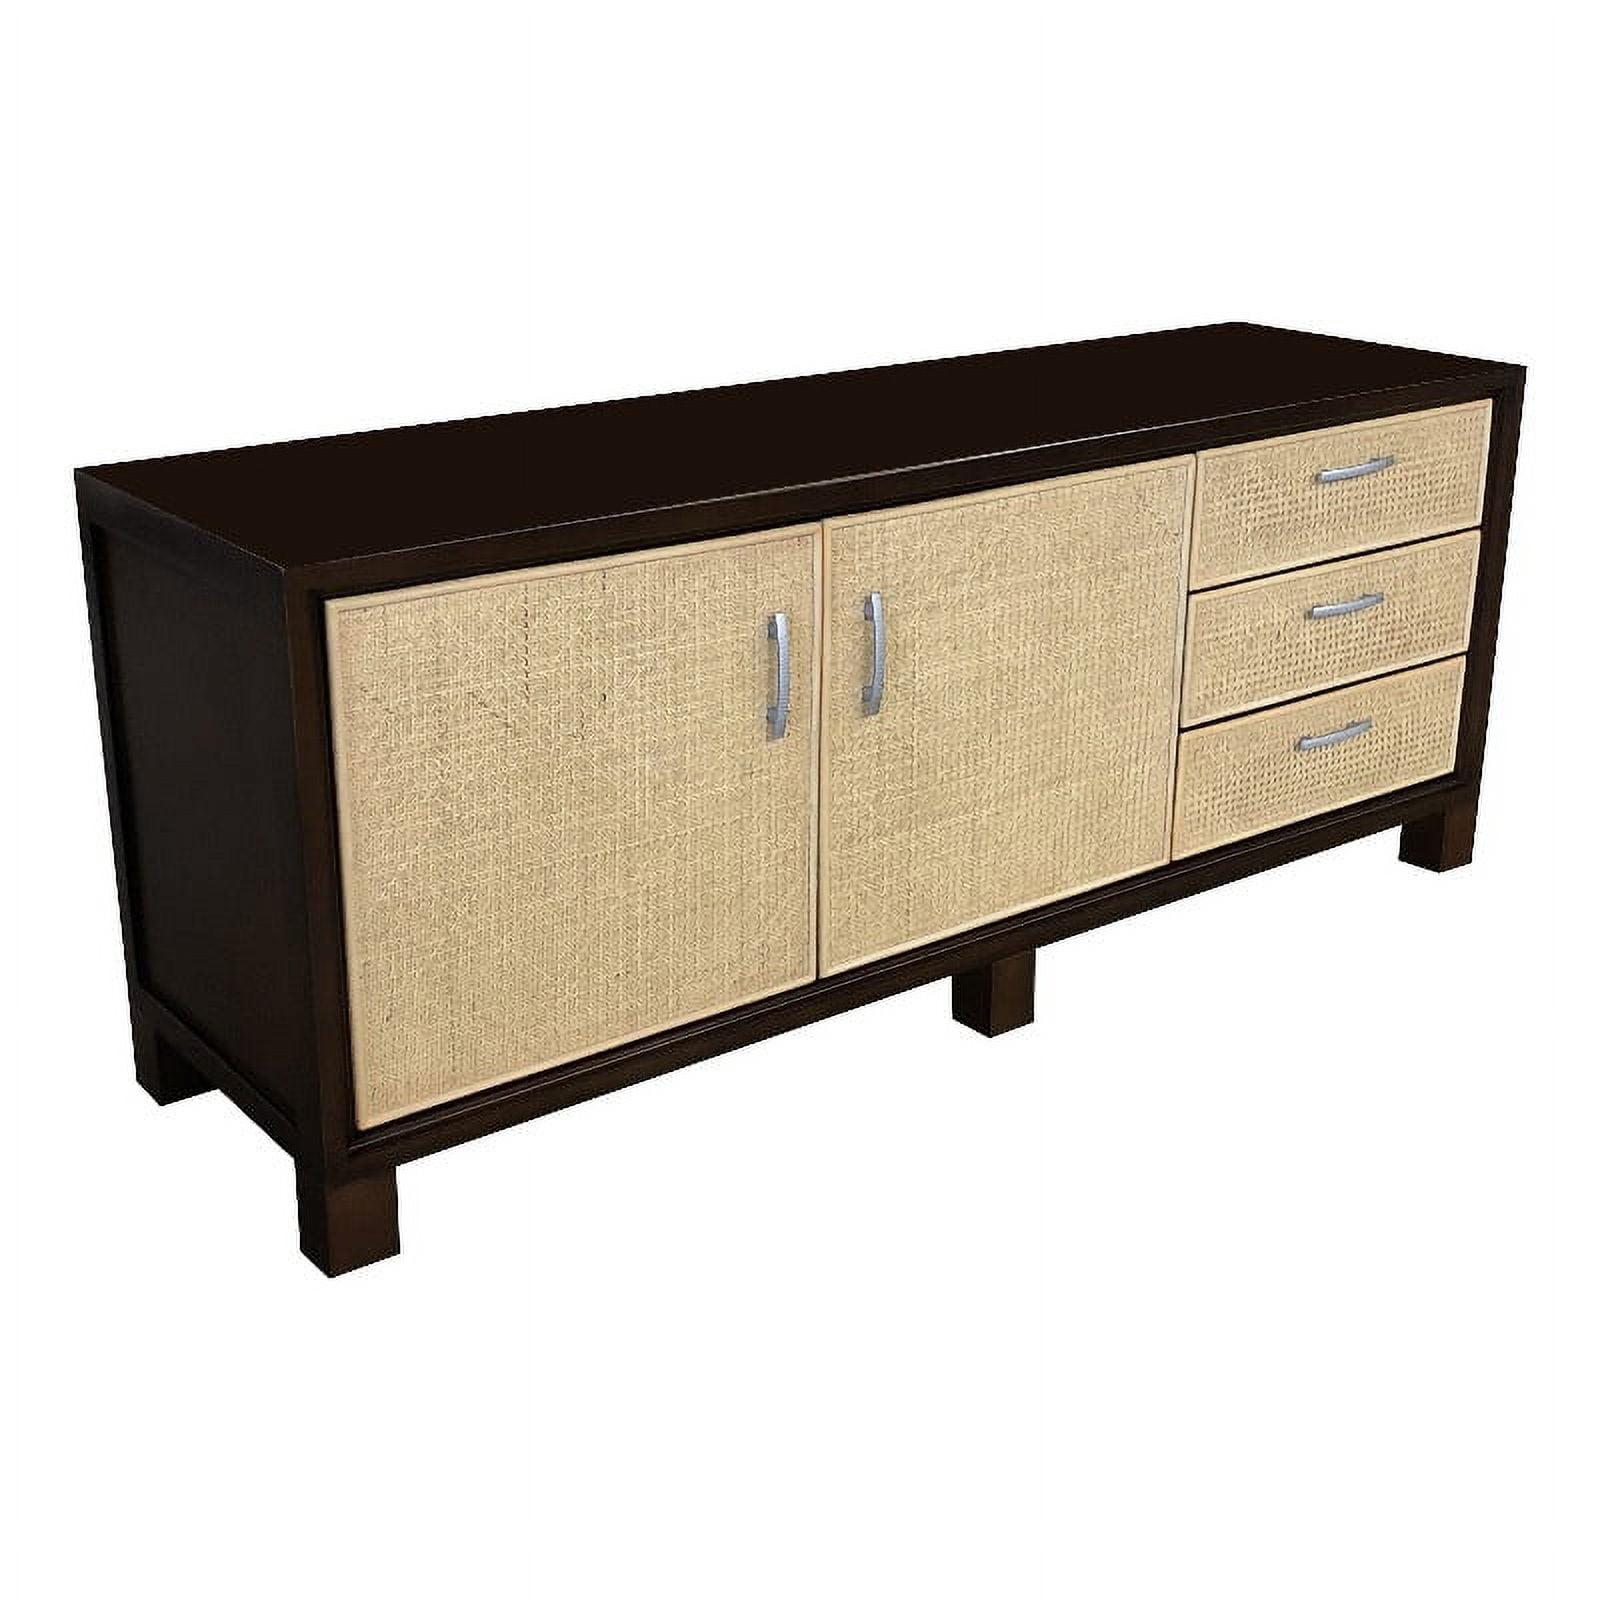 Elegant Mahogany Wood Accent Cabinet with Silver Hardware